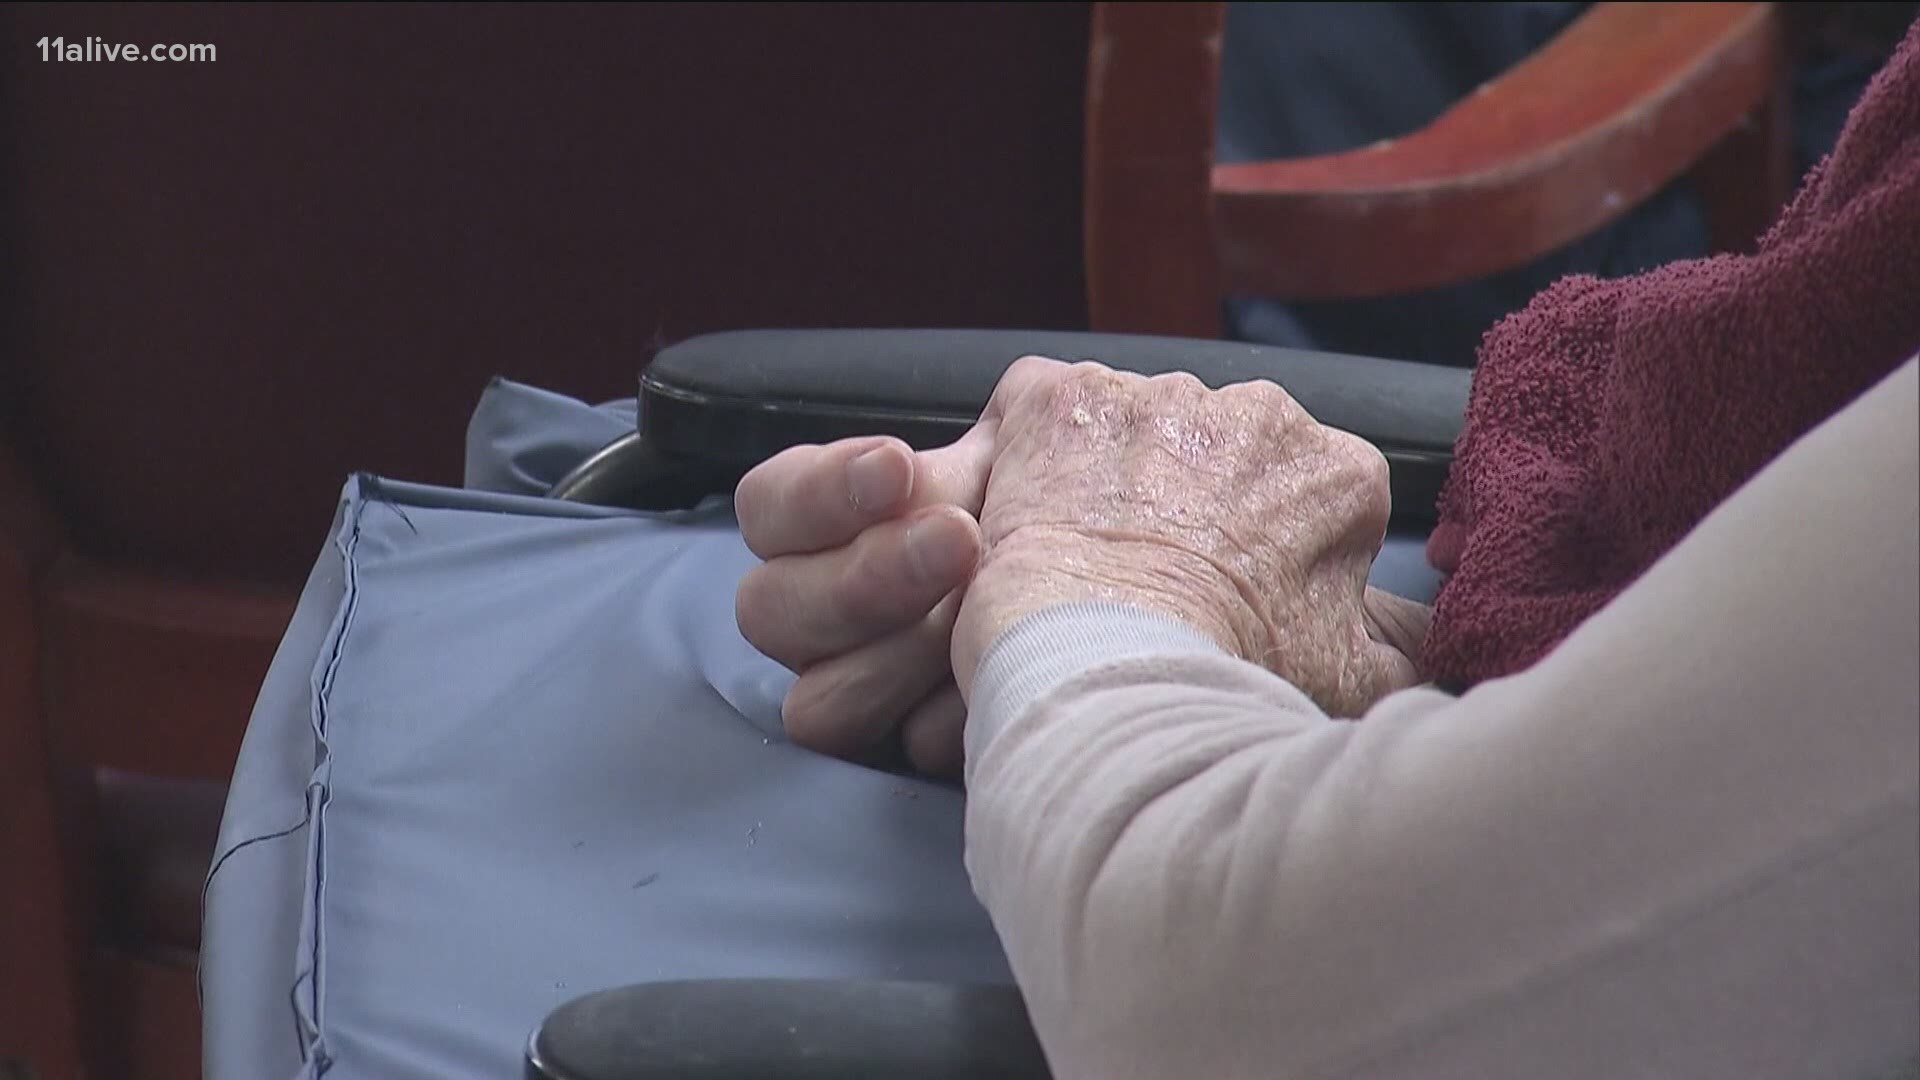 The Georgia House of Representatives on Friday passed a bill that would allow families and residents of nursing homes to put streaming cameras in their rooms.